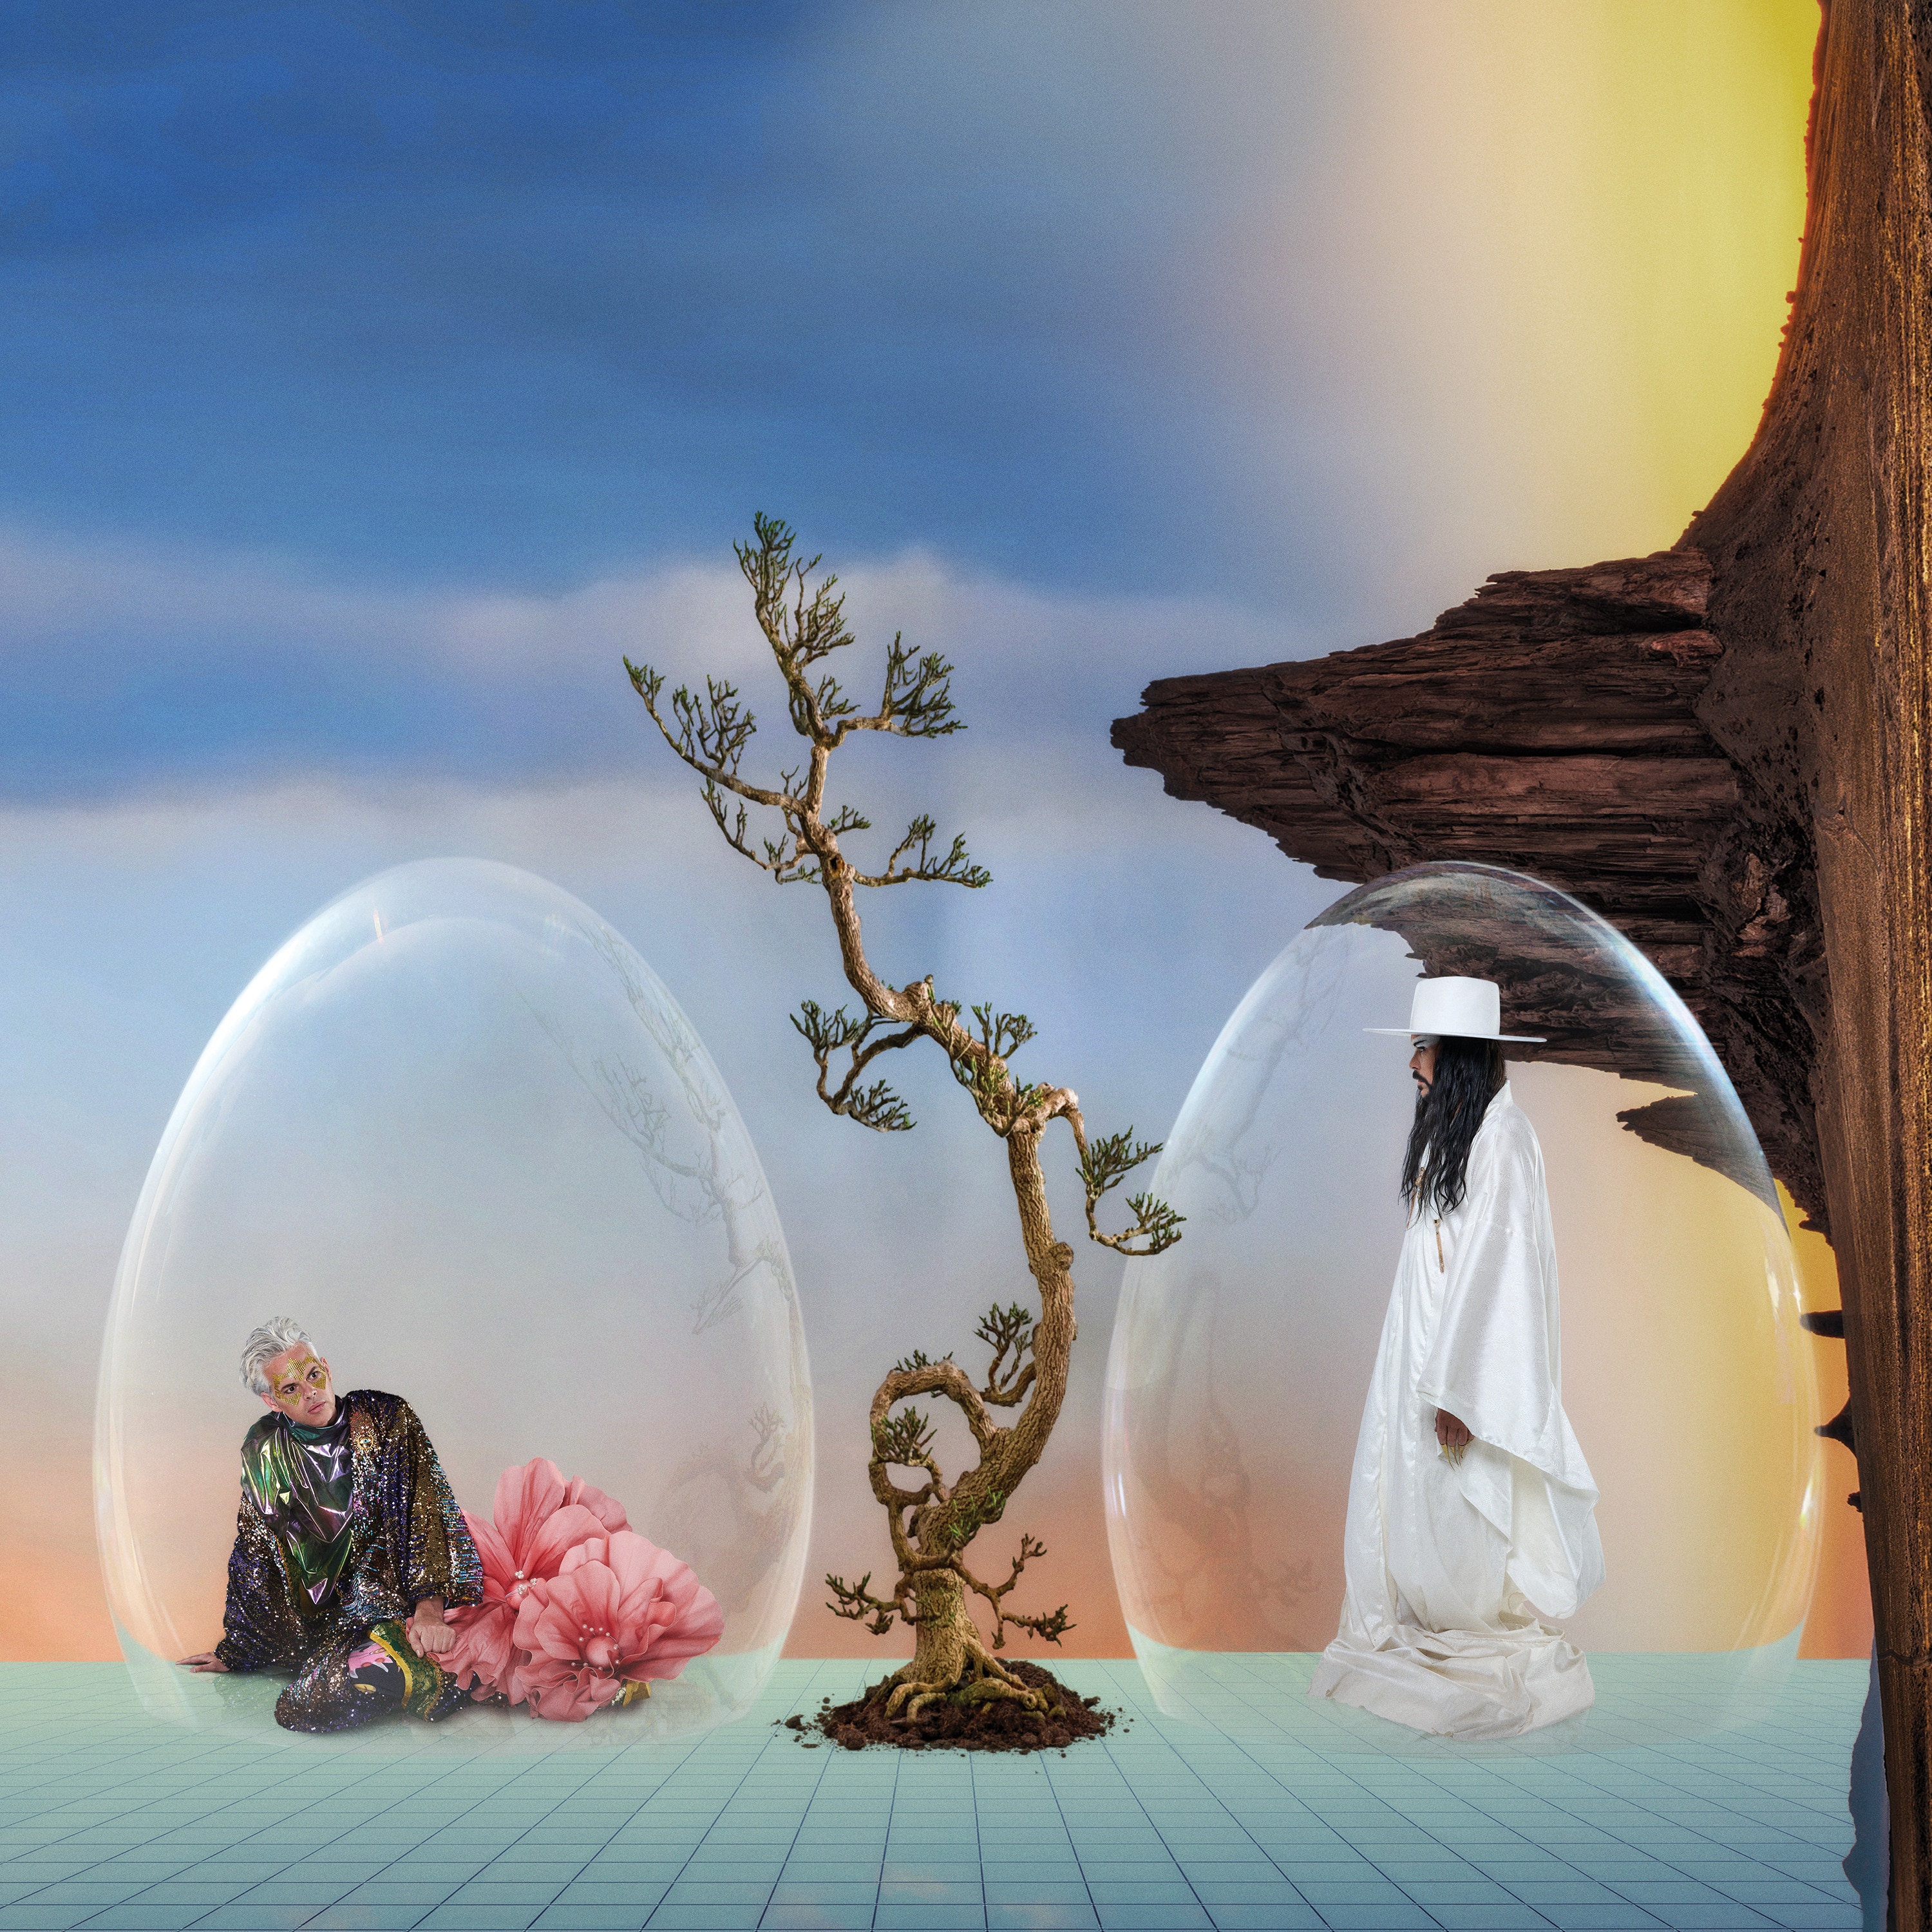 futuristic computer image of empire of the sun's luke steele and nick littlemore in bubbles in the desert